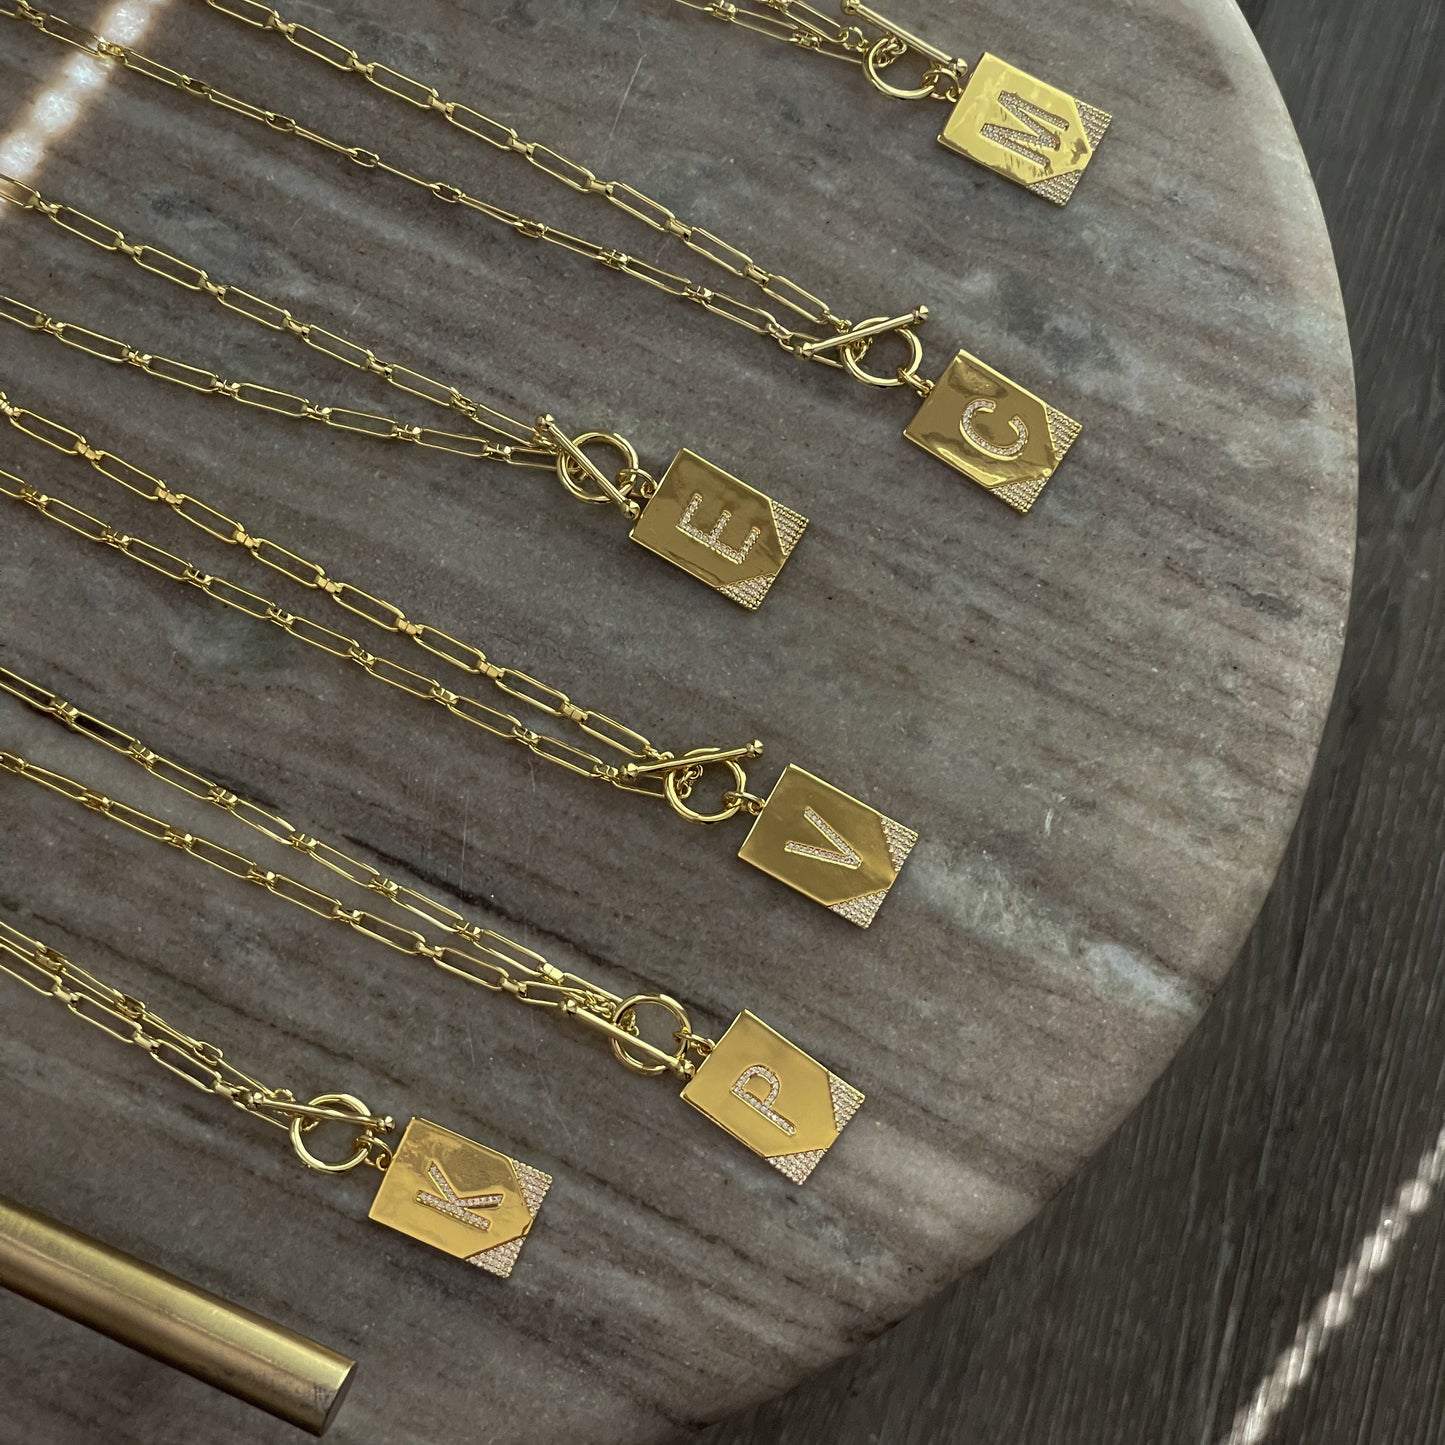 Leave Your Mark Chain Necklace | Gold A Gold B Gold C Gold D Gold E Gold G Gold H Gold J Gold K Gold L Gold M Gold N Gold P Gold R Gold S Gold T Gold V | Lifestyle Image | Uncommon James